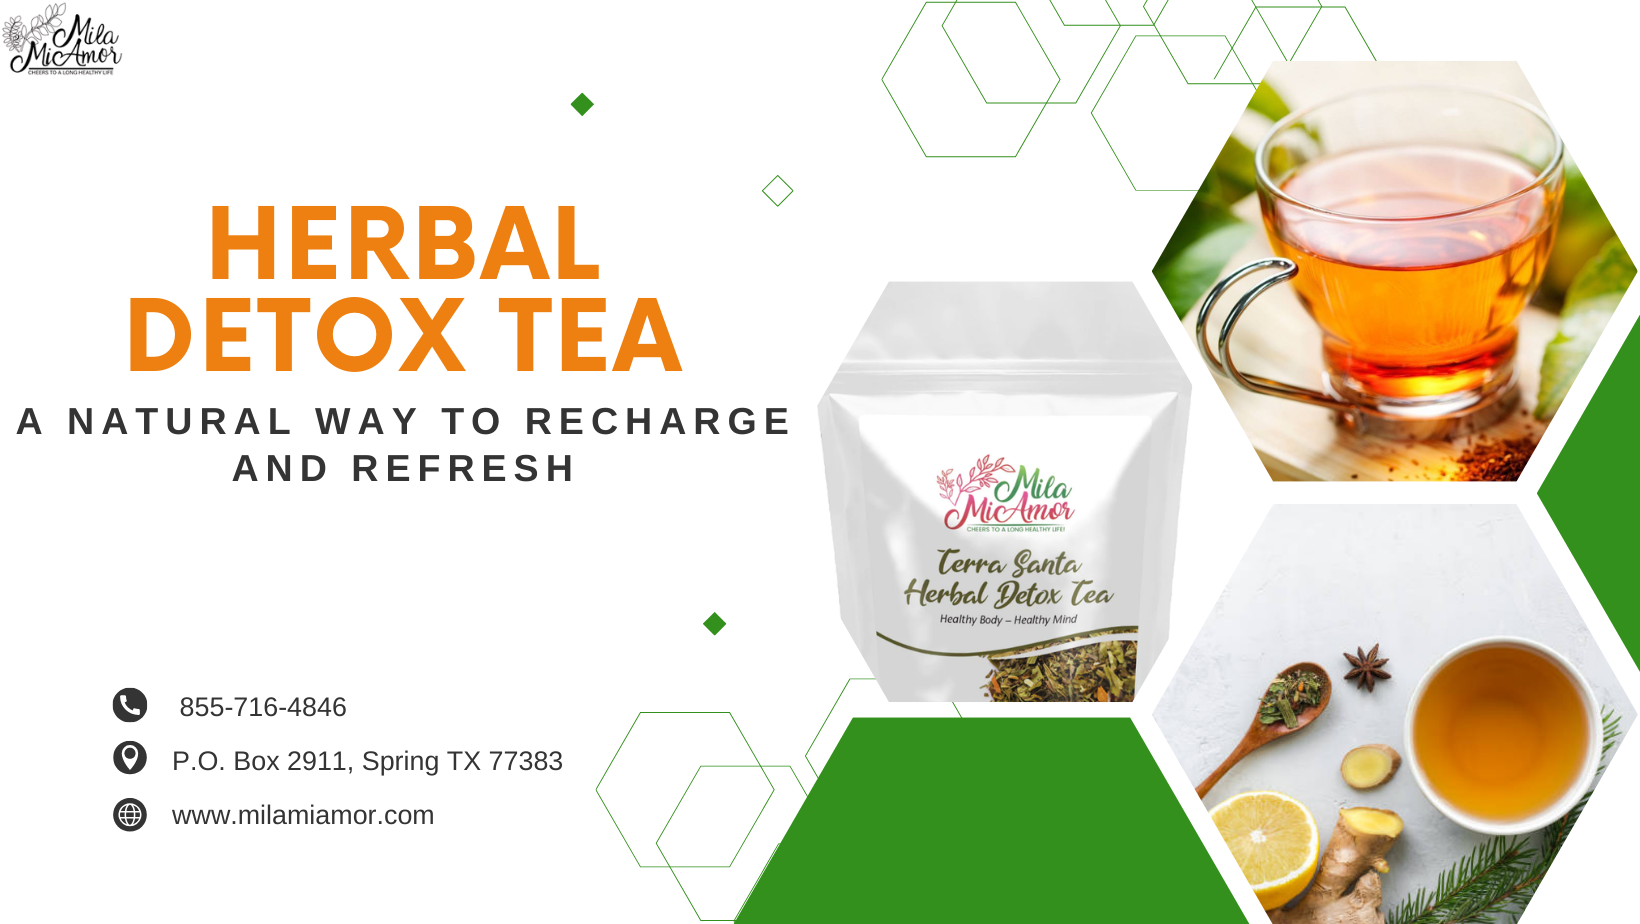 Herbal Detox Tea: A Natural Way to Recharge and Refresh